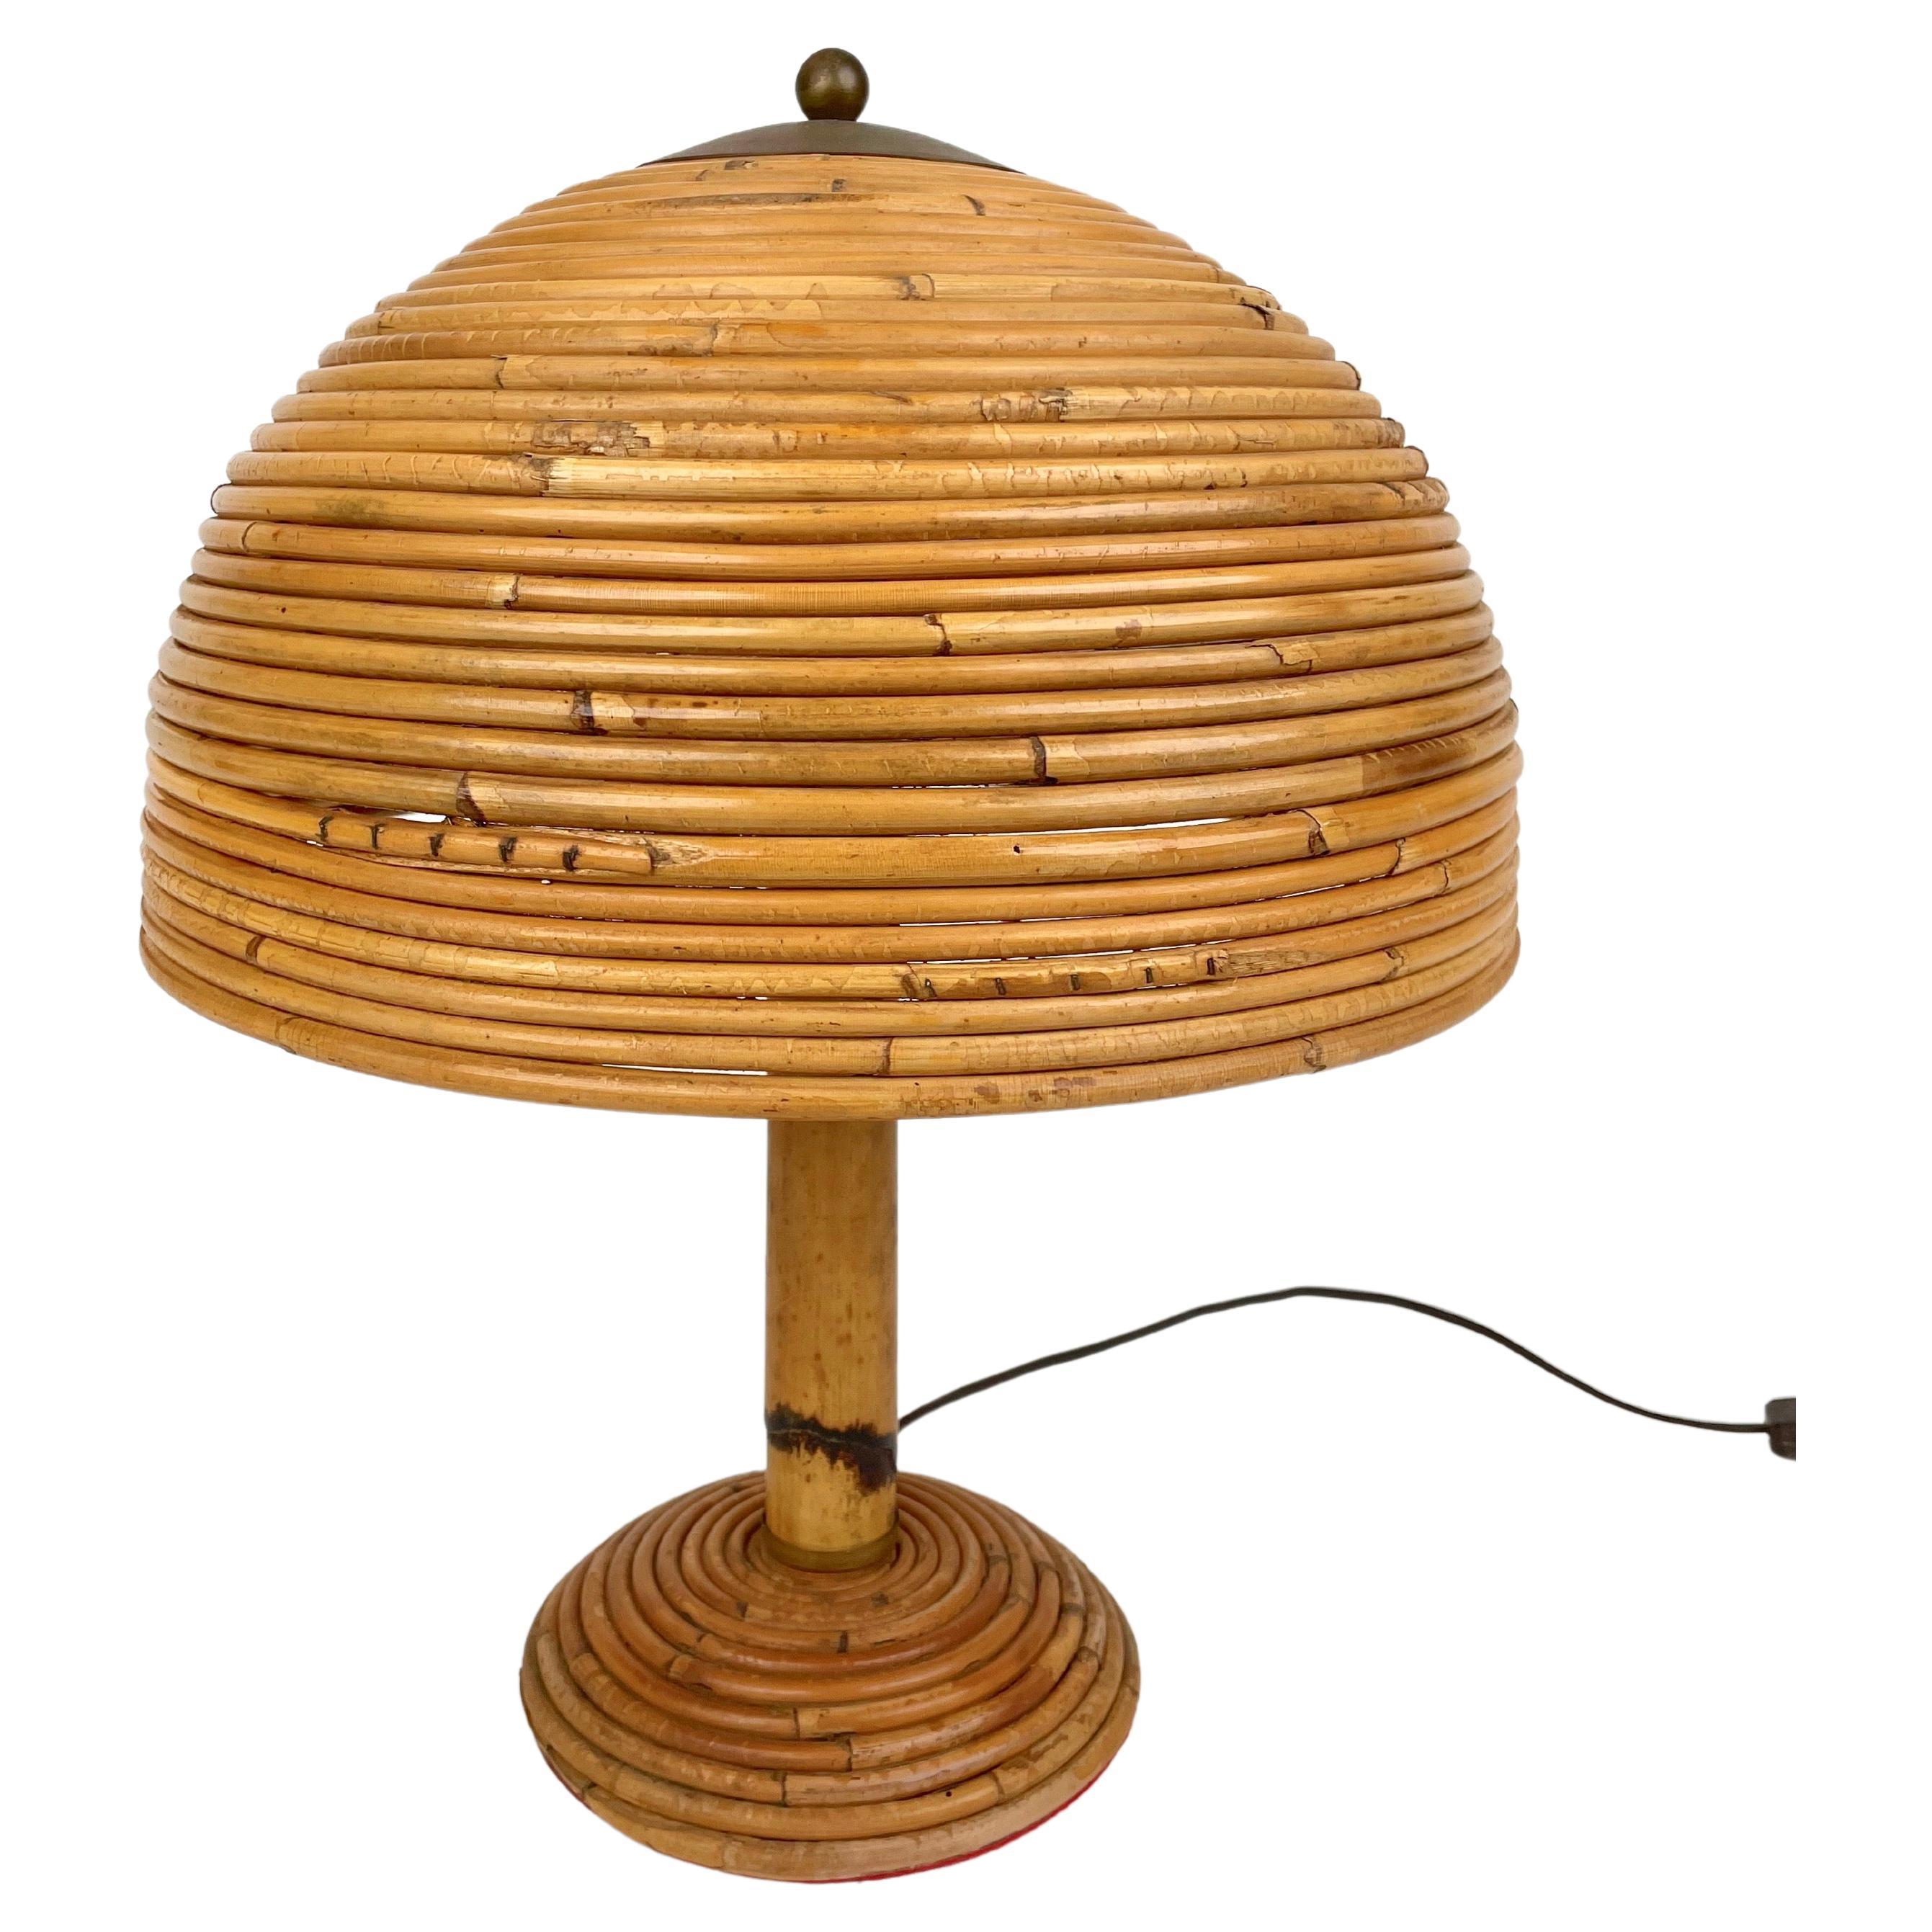 Mushroom-shaped table lamp in bamboo and rattan with brass details.

Made in Italy in the 1960s.